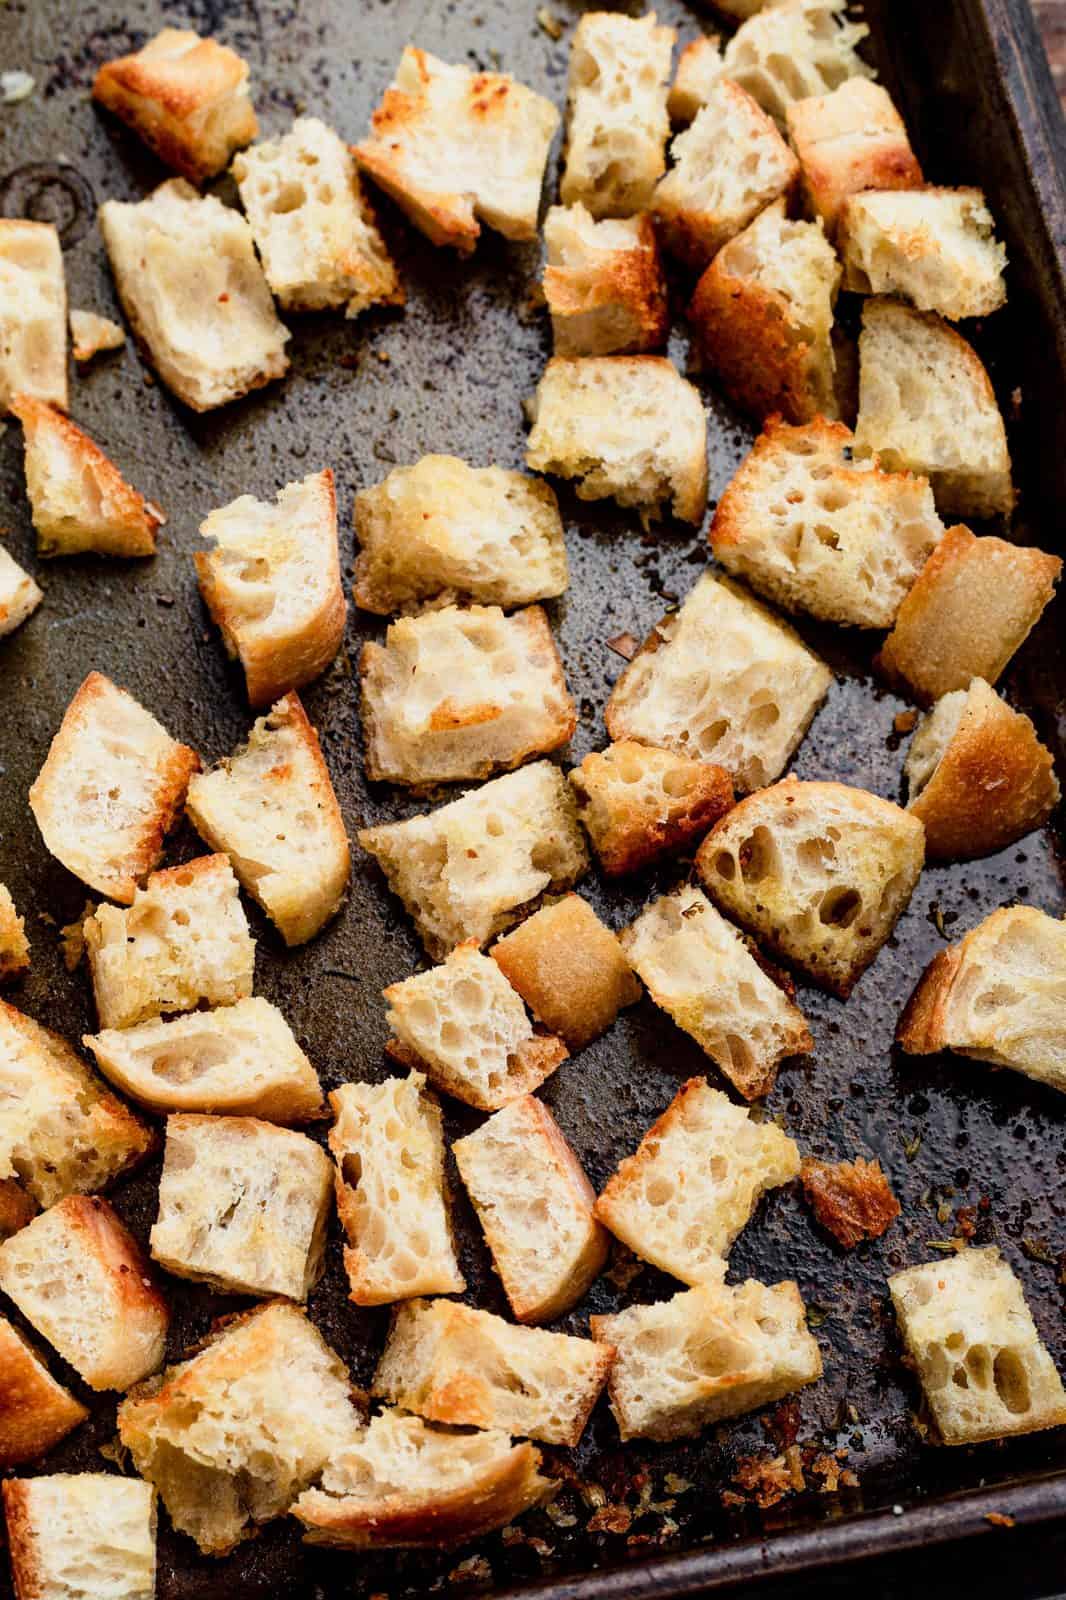 Finished Garlic Croutons on pan.